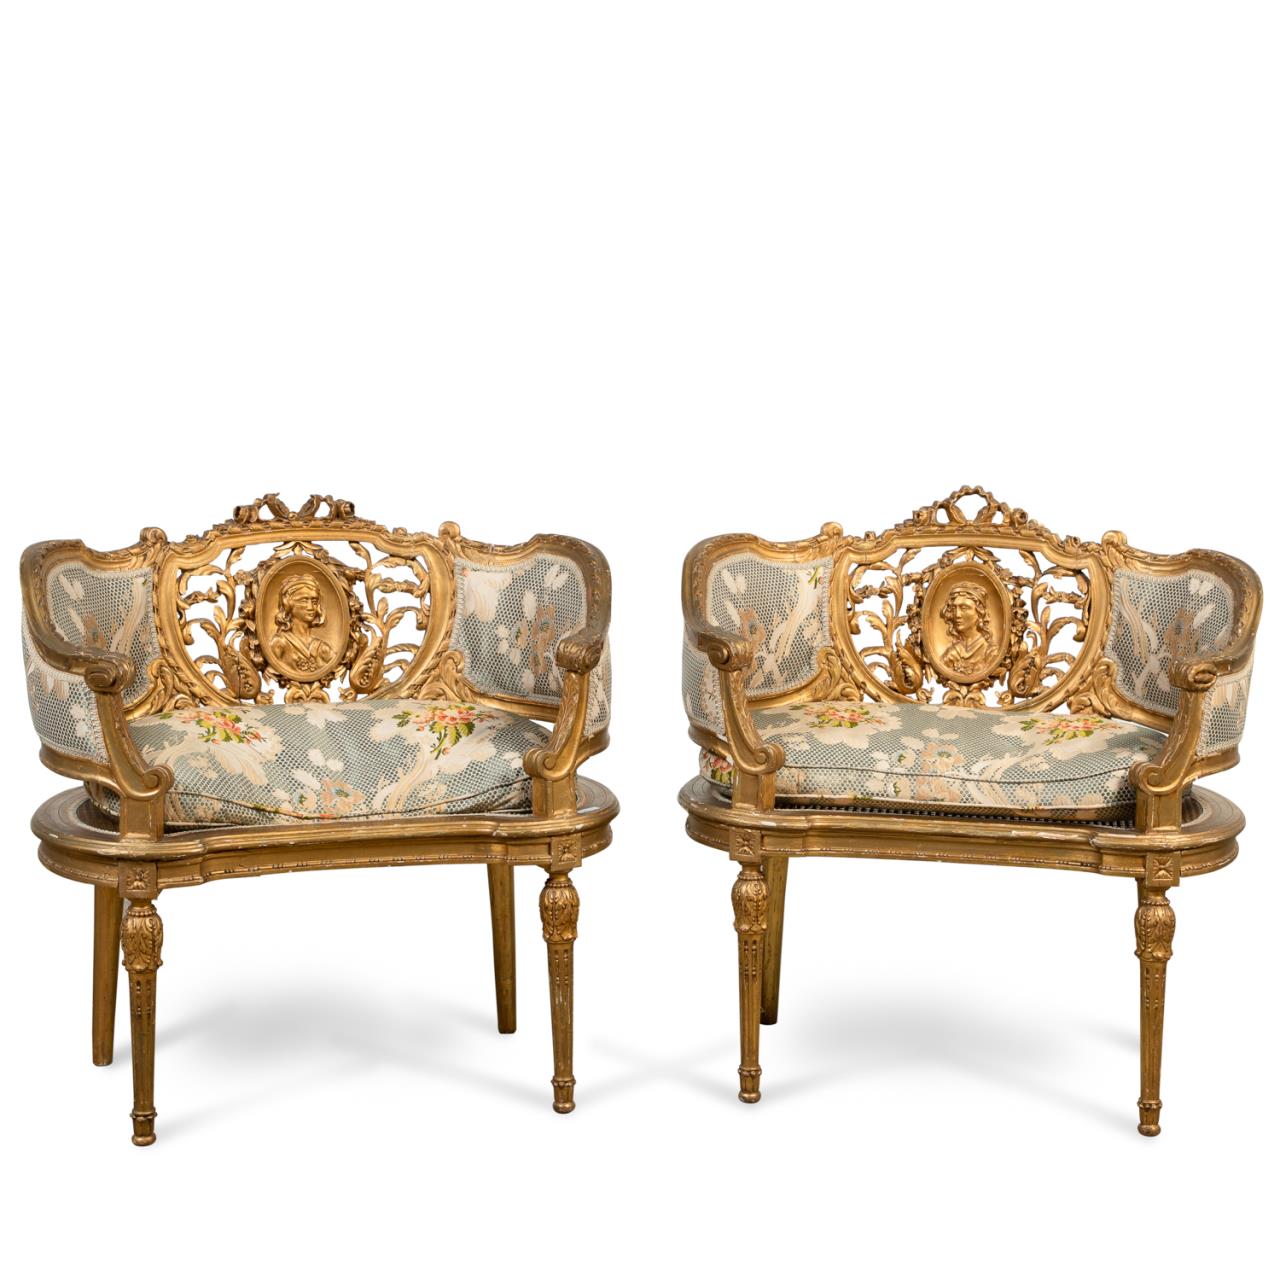 PAIR LOUIS XVI STYLE GOLD PAINTED